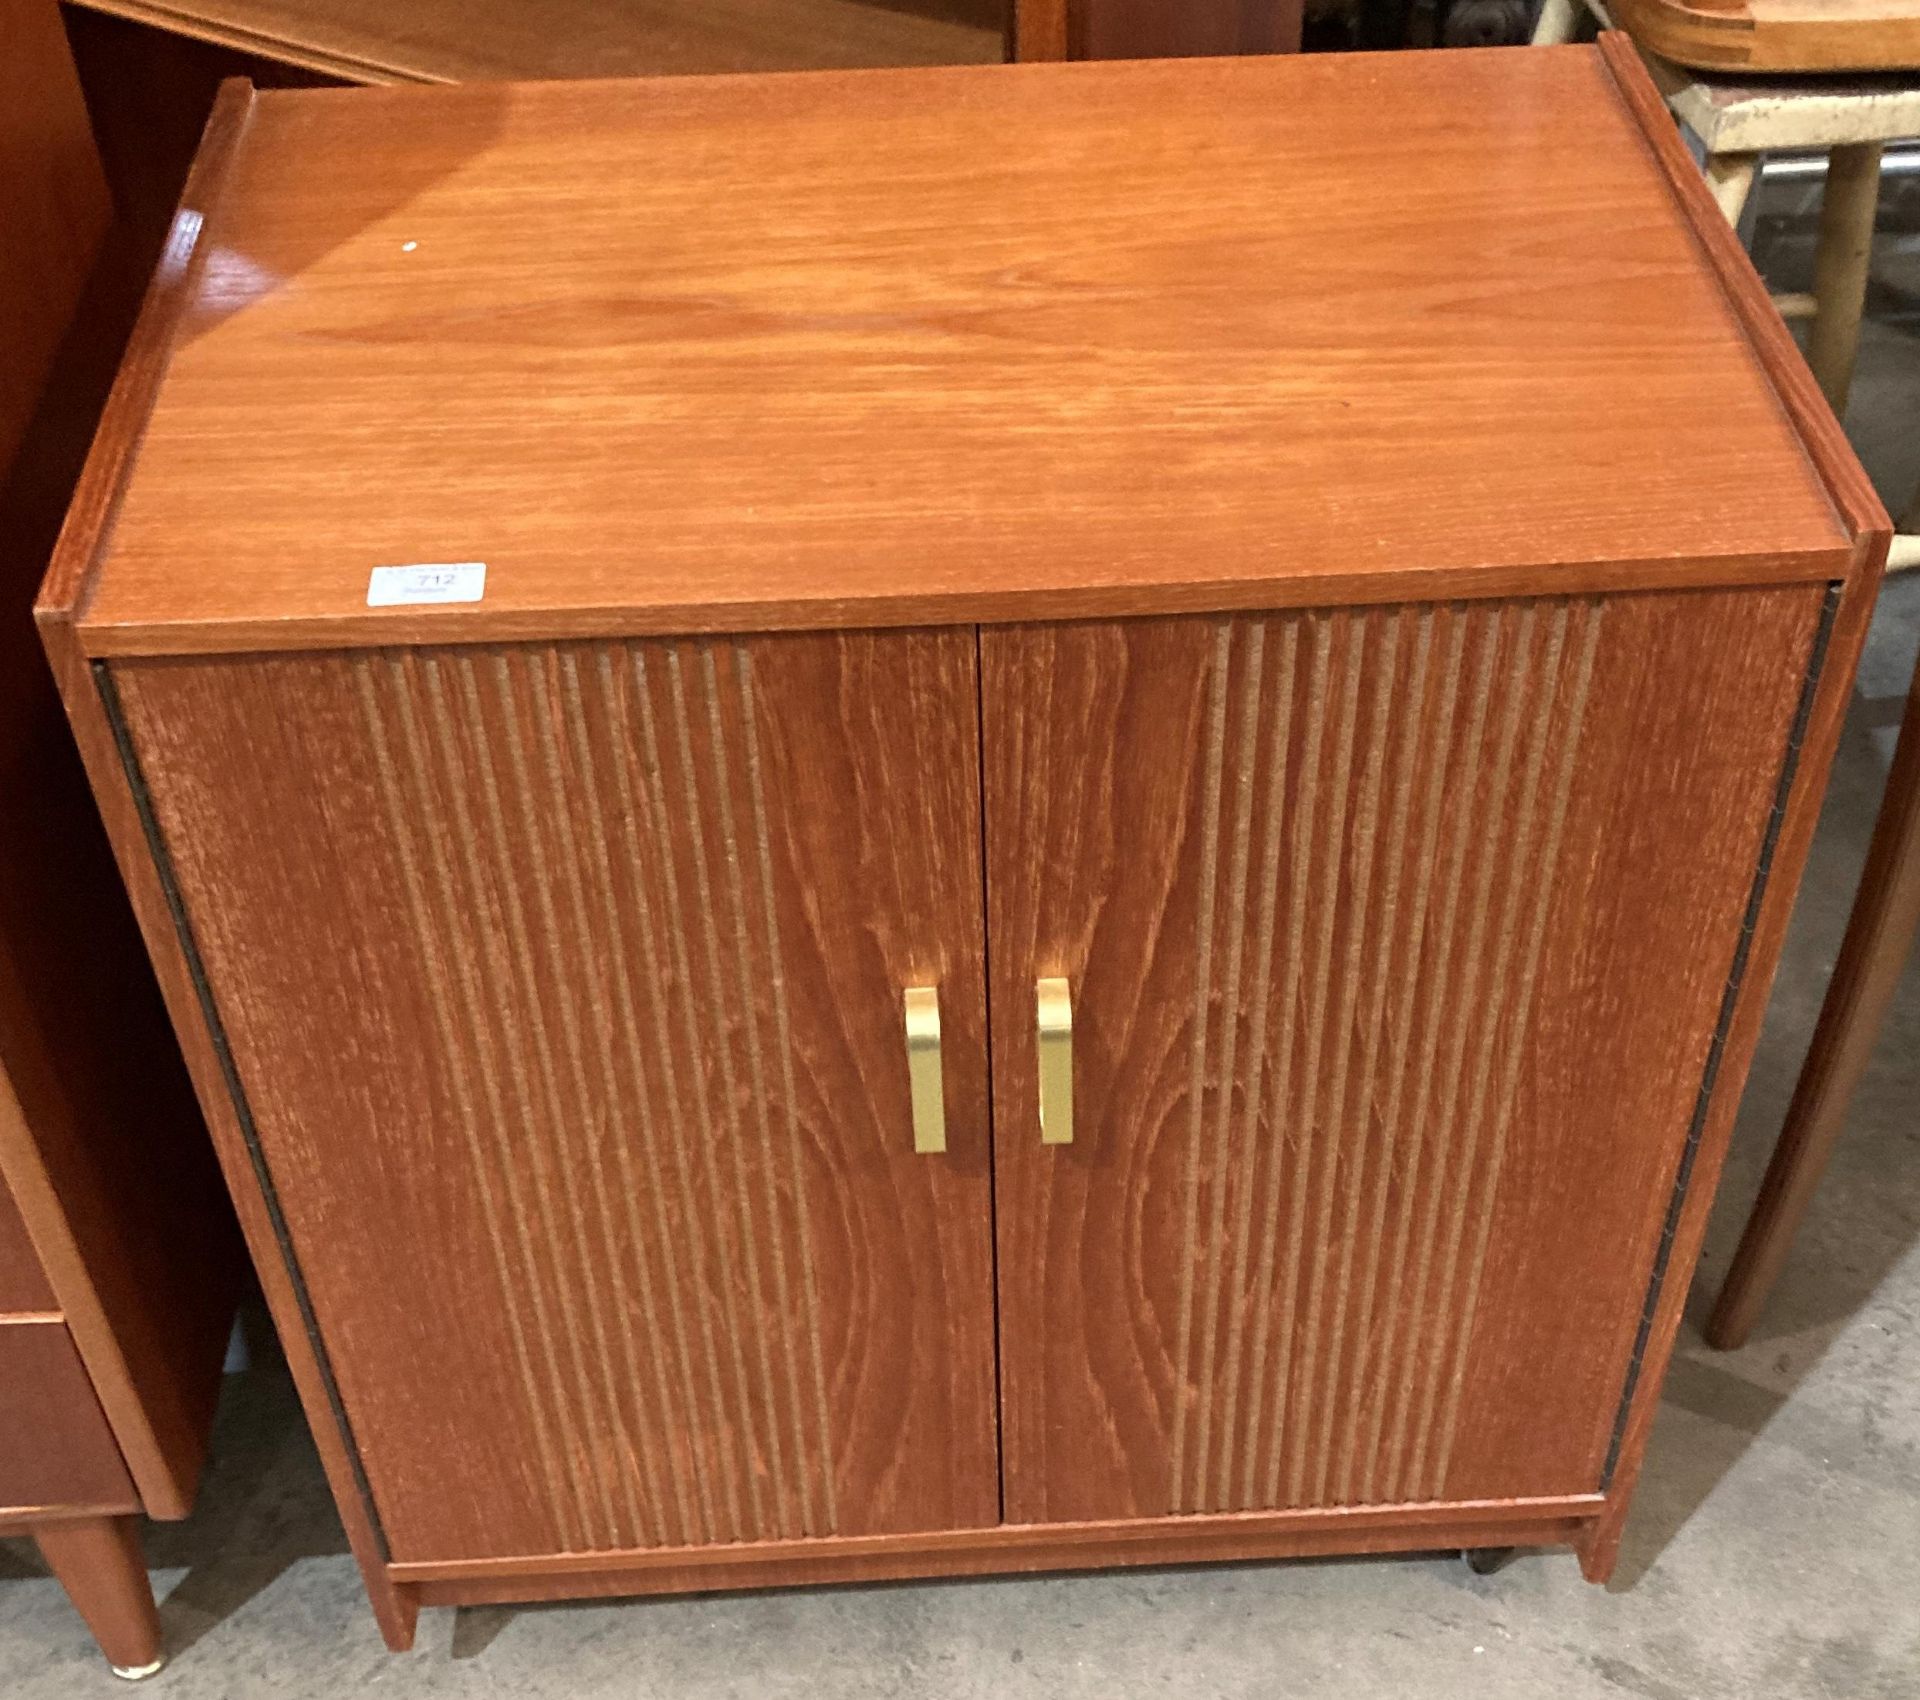 A teak two door mobile record cabinet - 64 x 42 a 69cm high (saleroom location: MS)